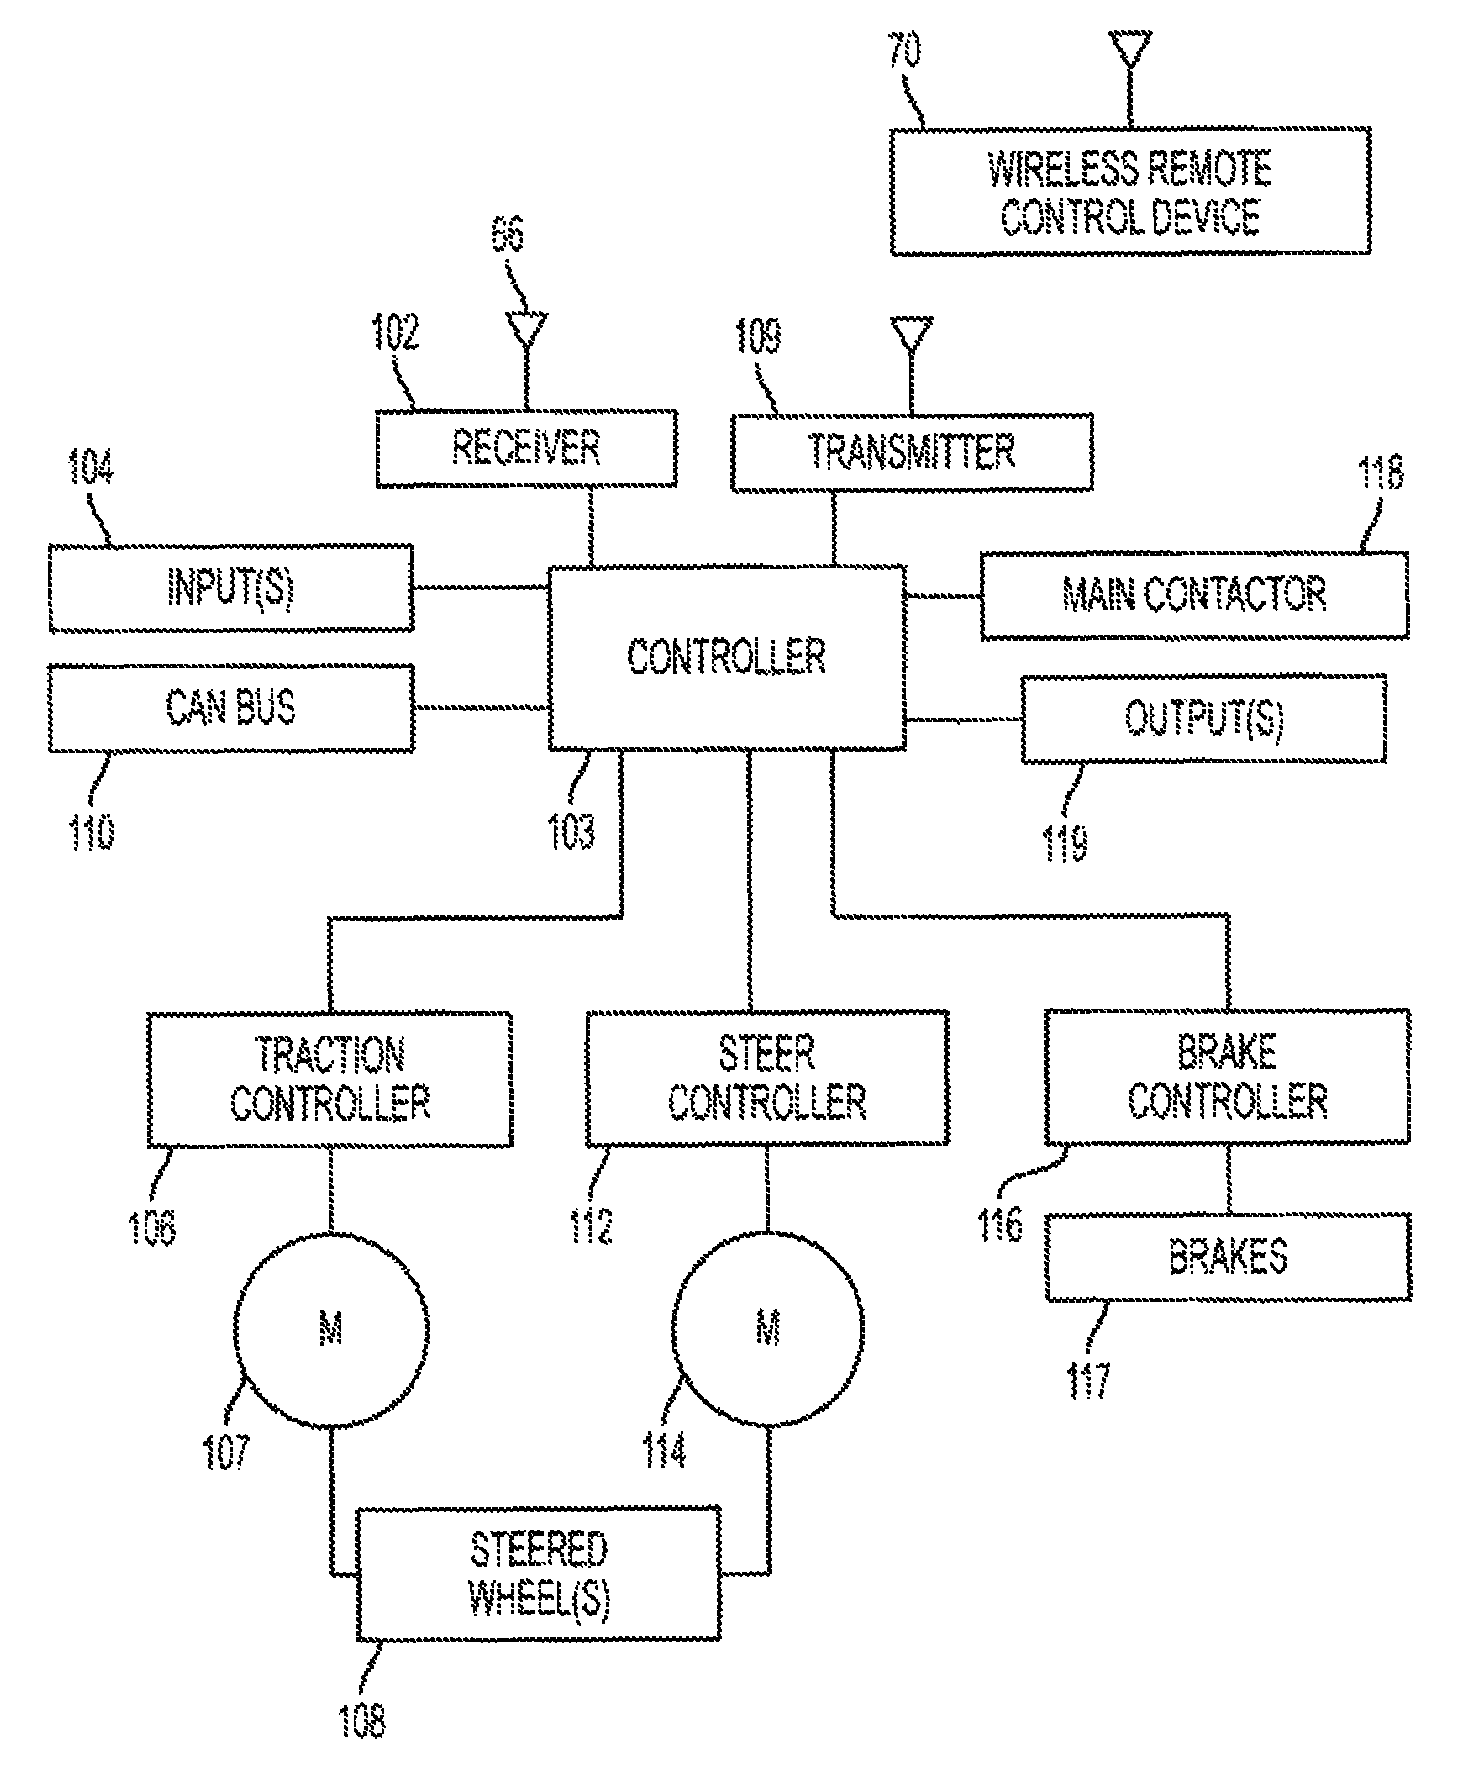 Wearable wireless remote control device for use with a materials handling vehicle